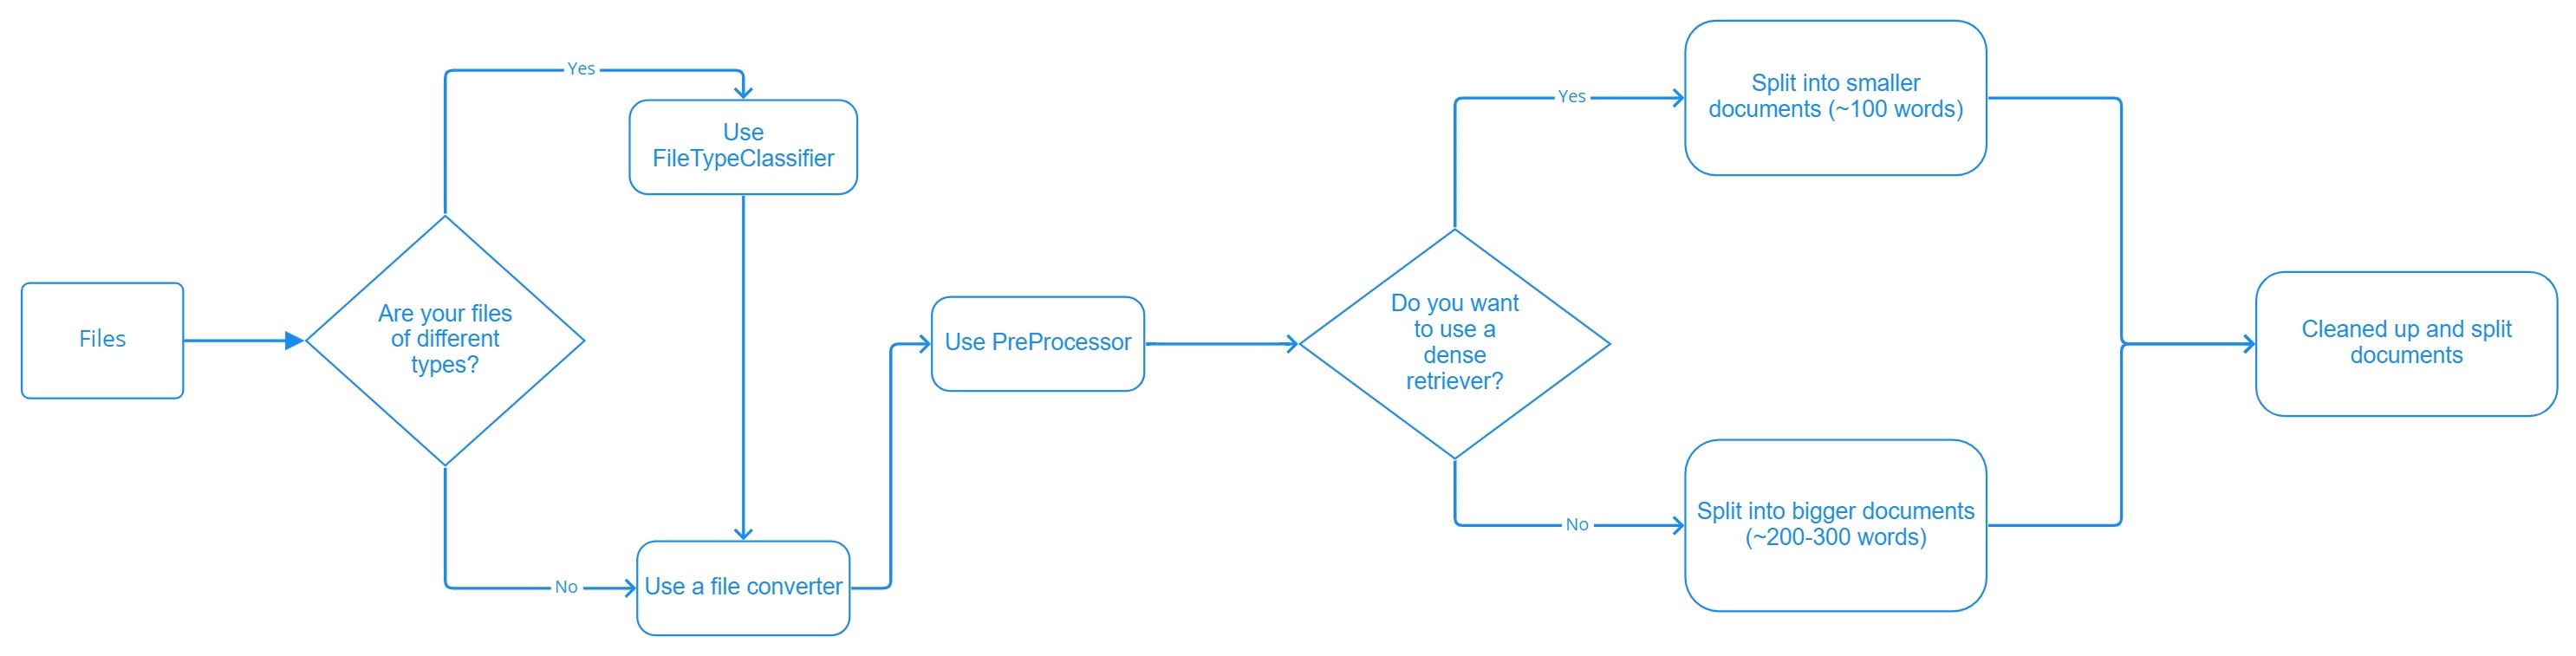 A flow chart showing the process for deciding which nodes to use to preprocess files